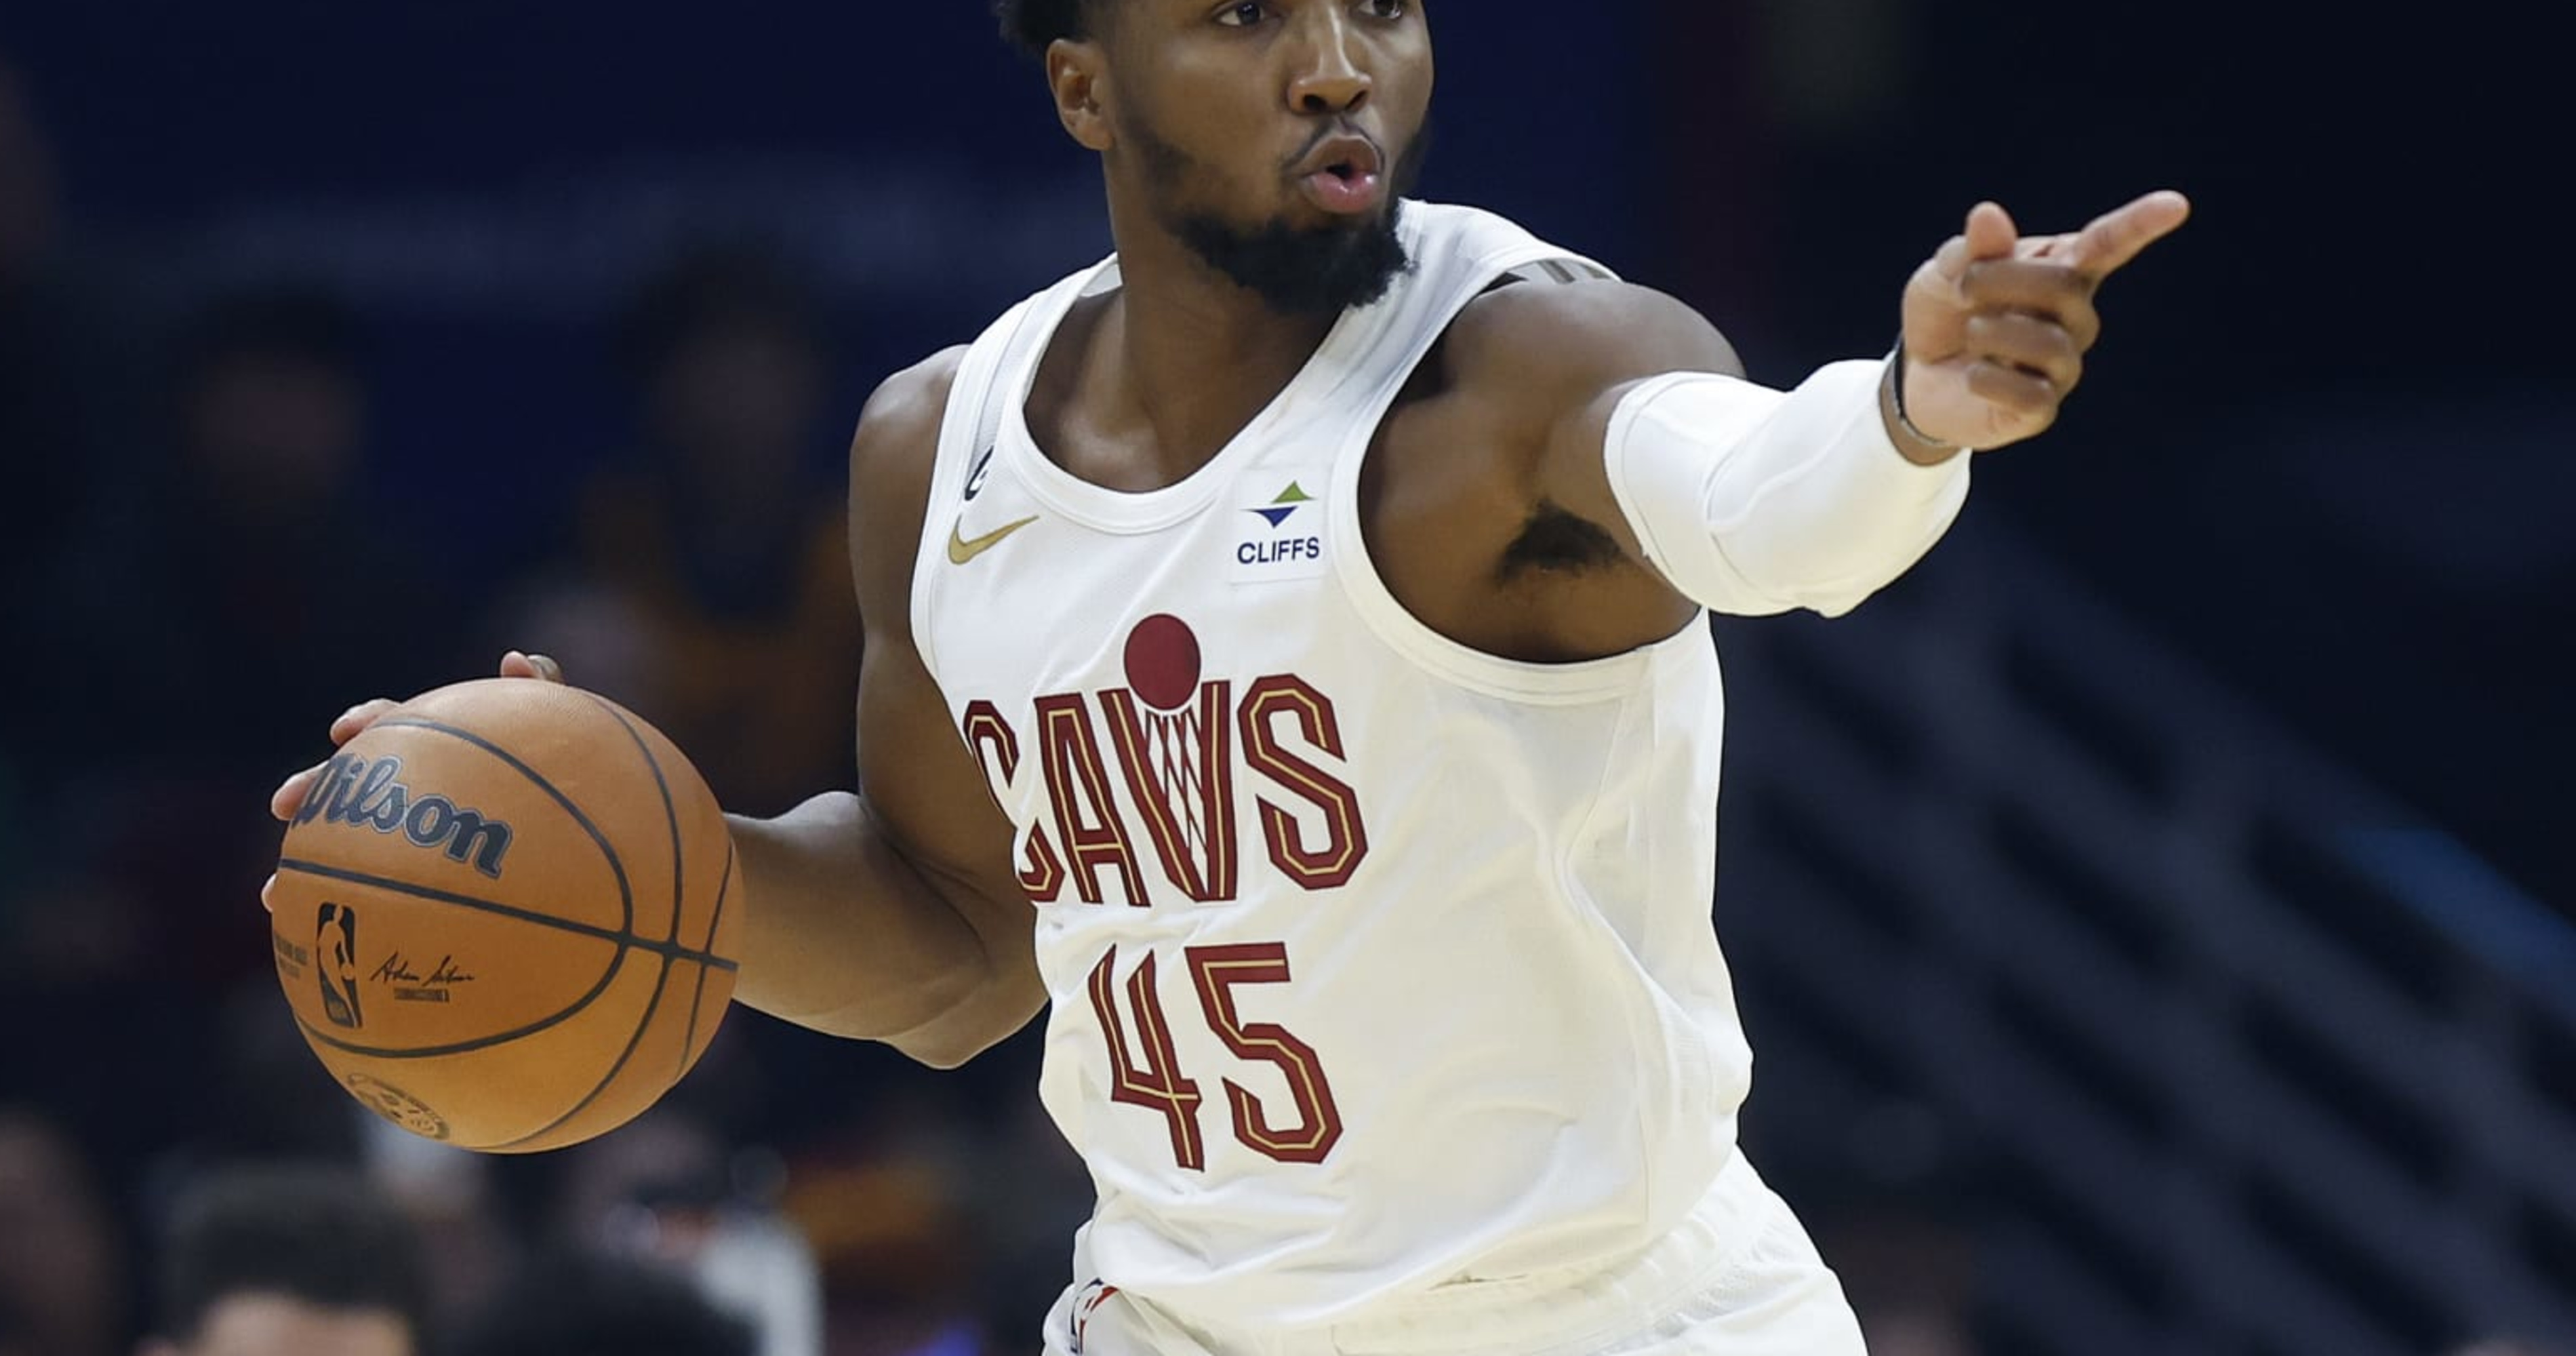 BREAKING: Donovan Mitchell Traded To CLEVELAND CAVALIERS